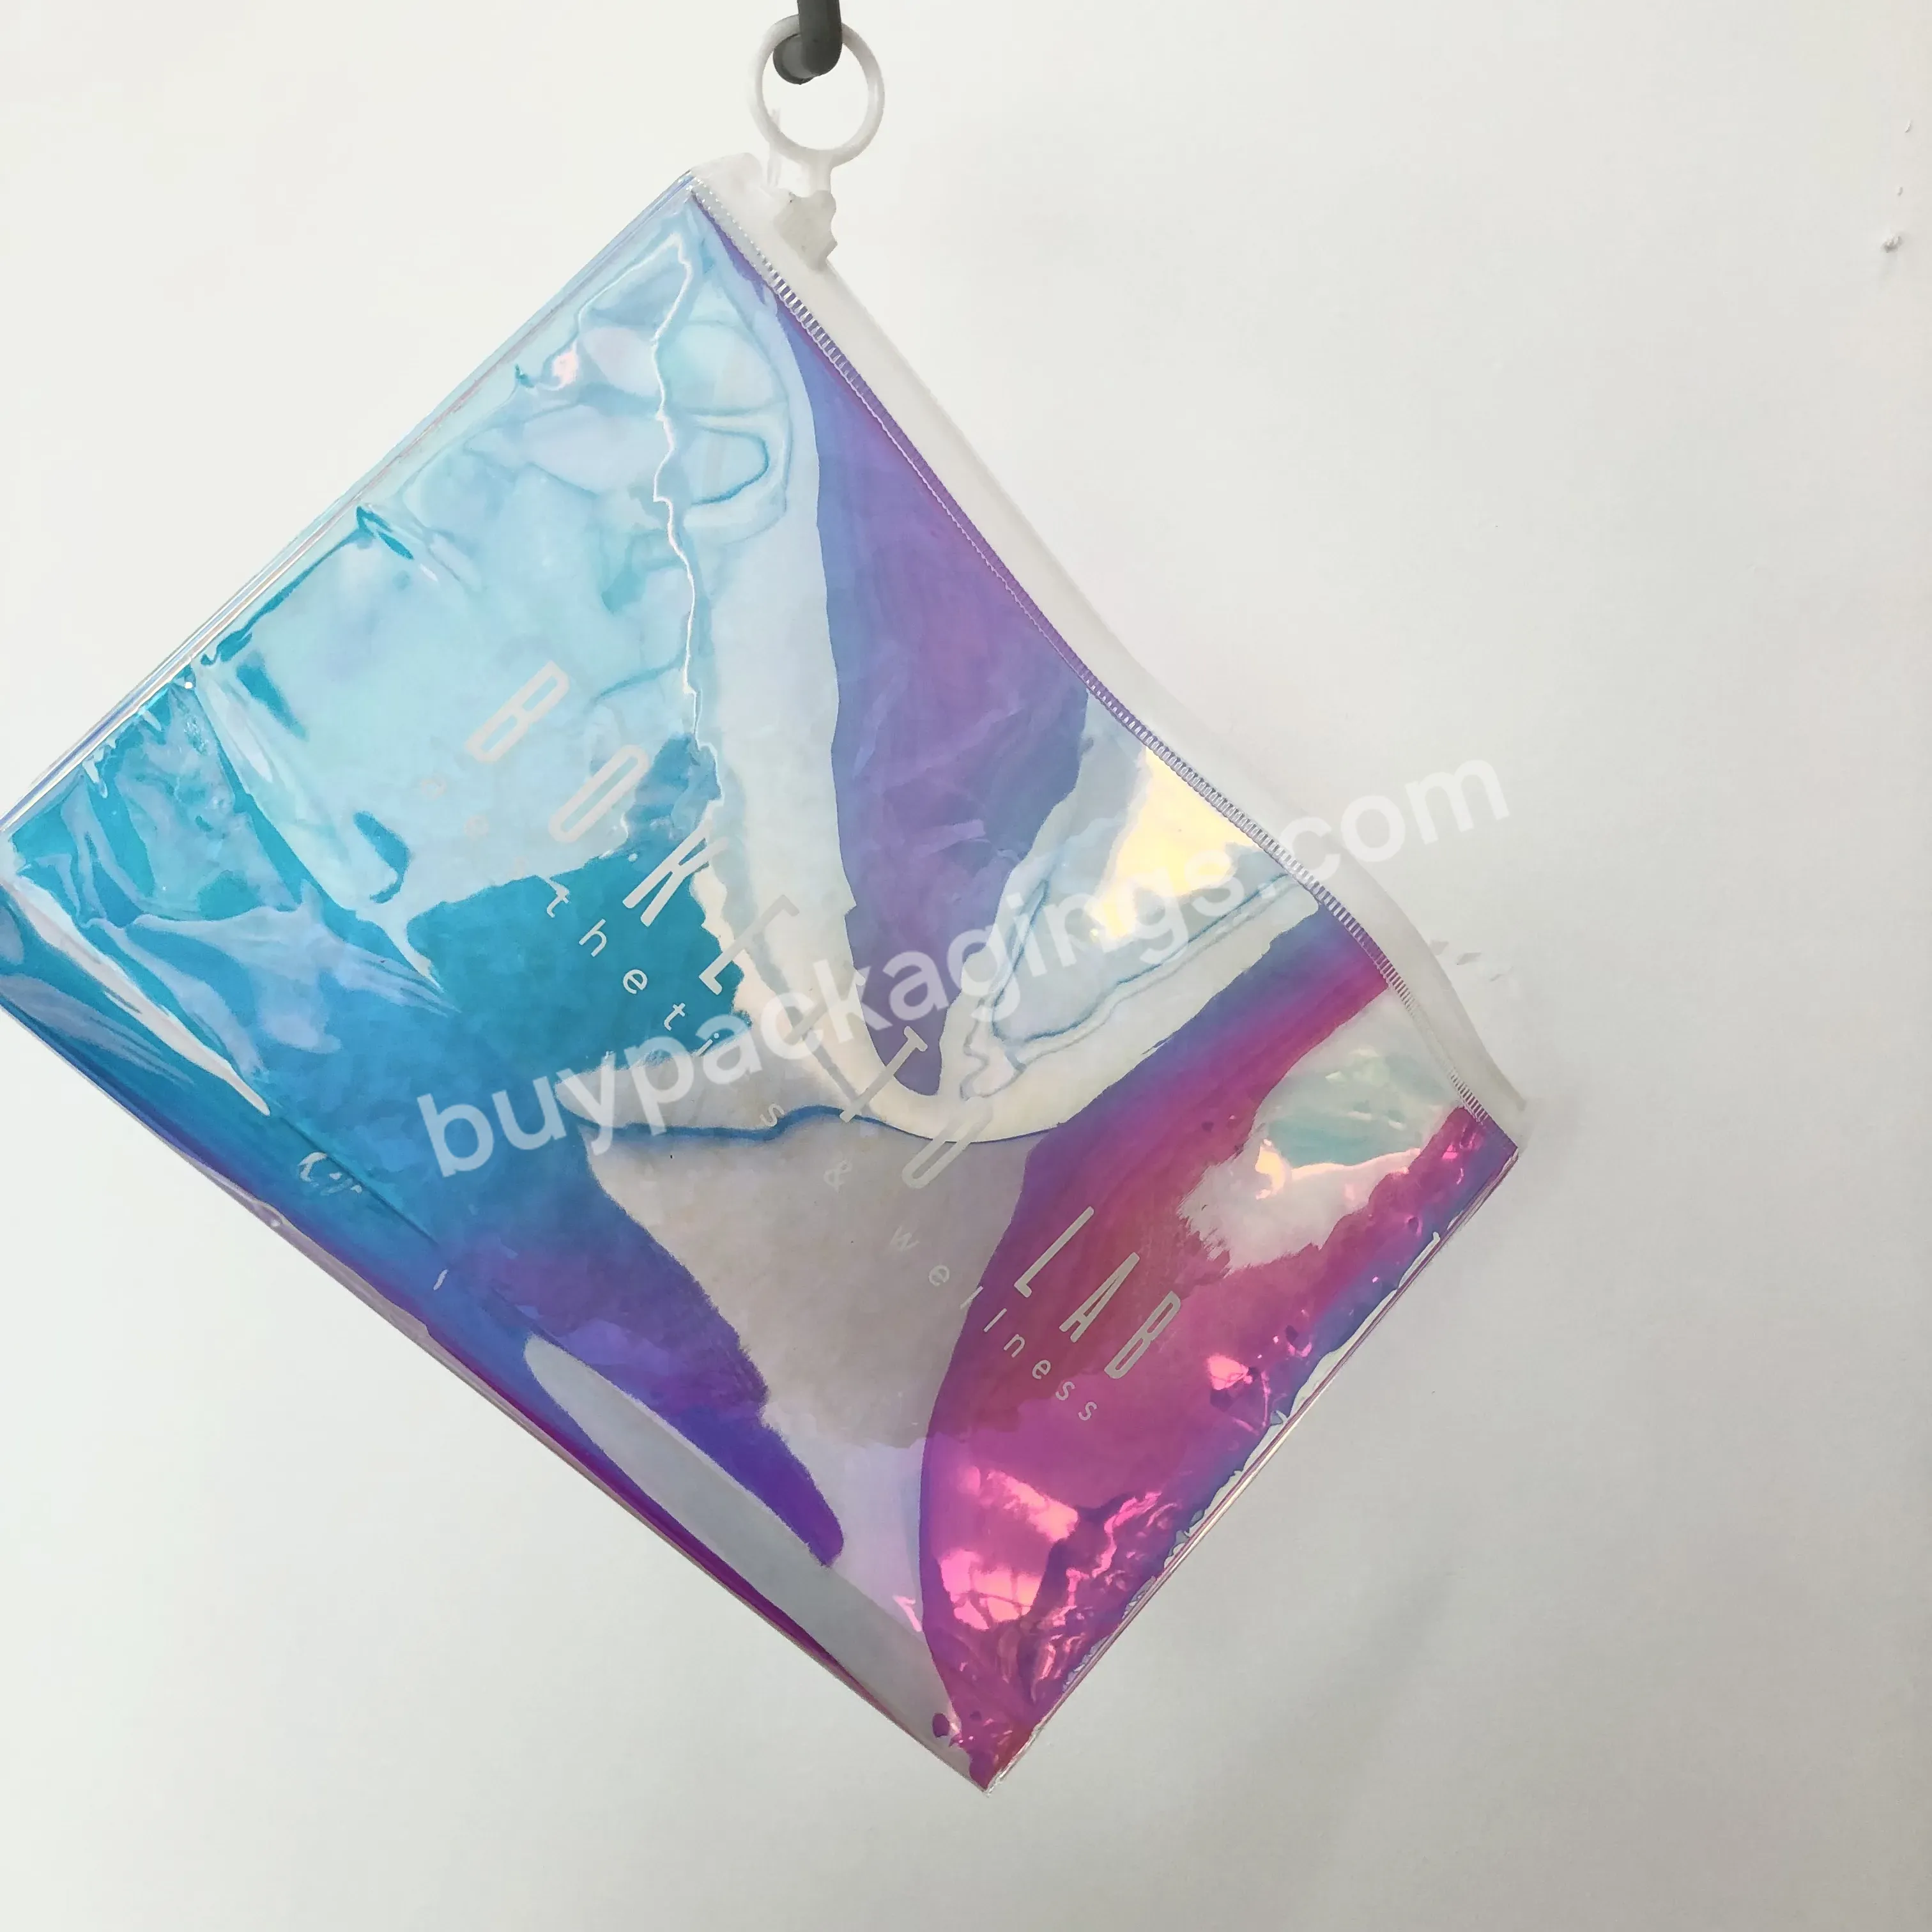 Customized Holographic Pvc Laser Waterproof Poly Metallic Mailer Clear Side Bag - Buy Holographic Bag Ziplock,Holographic Poly Metallic Mailer Clear Side Bag,Holographic Pvc Bag.